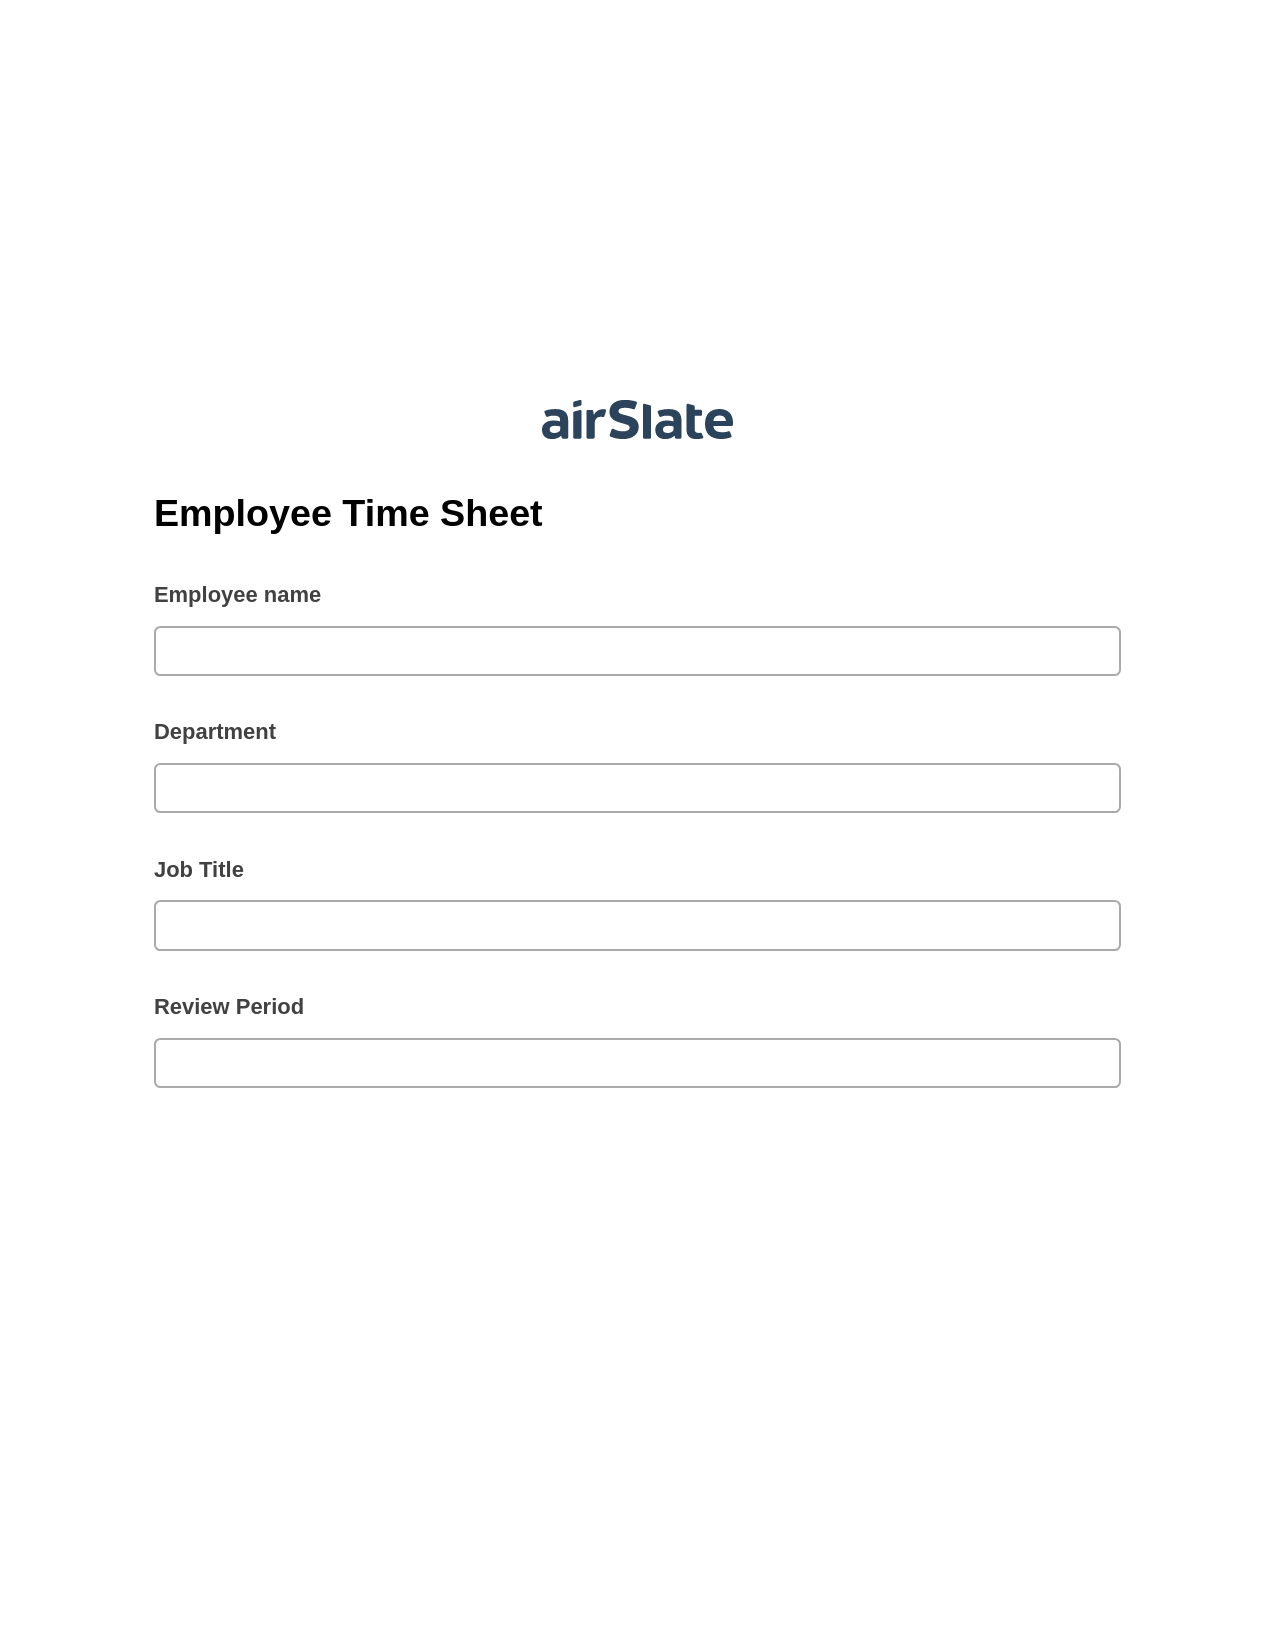 Employee Time Sheet Pre-fill from CSV File Bot, Update Audit Trail Bot, Export to WebMerge Bot